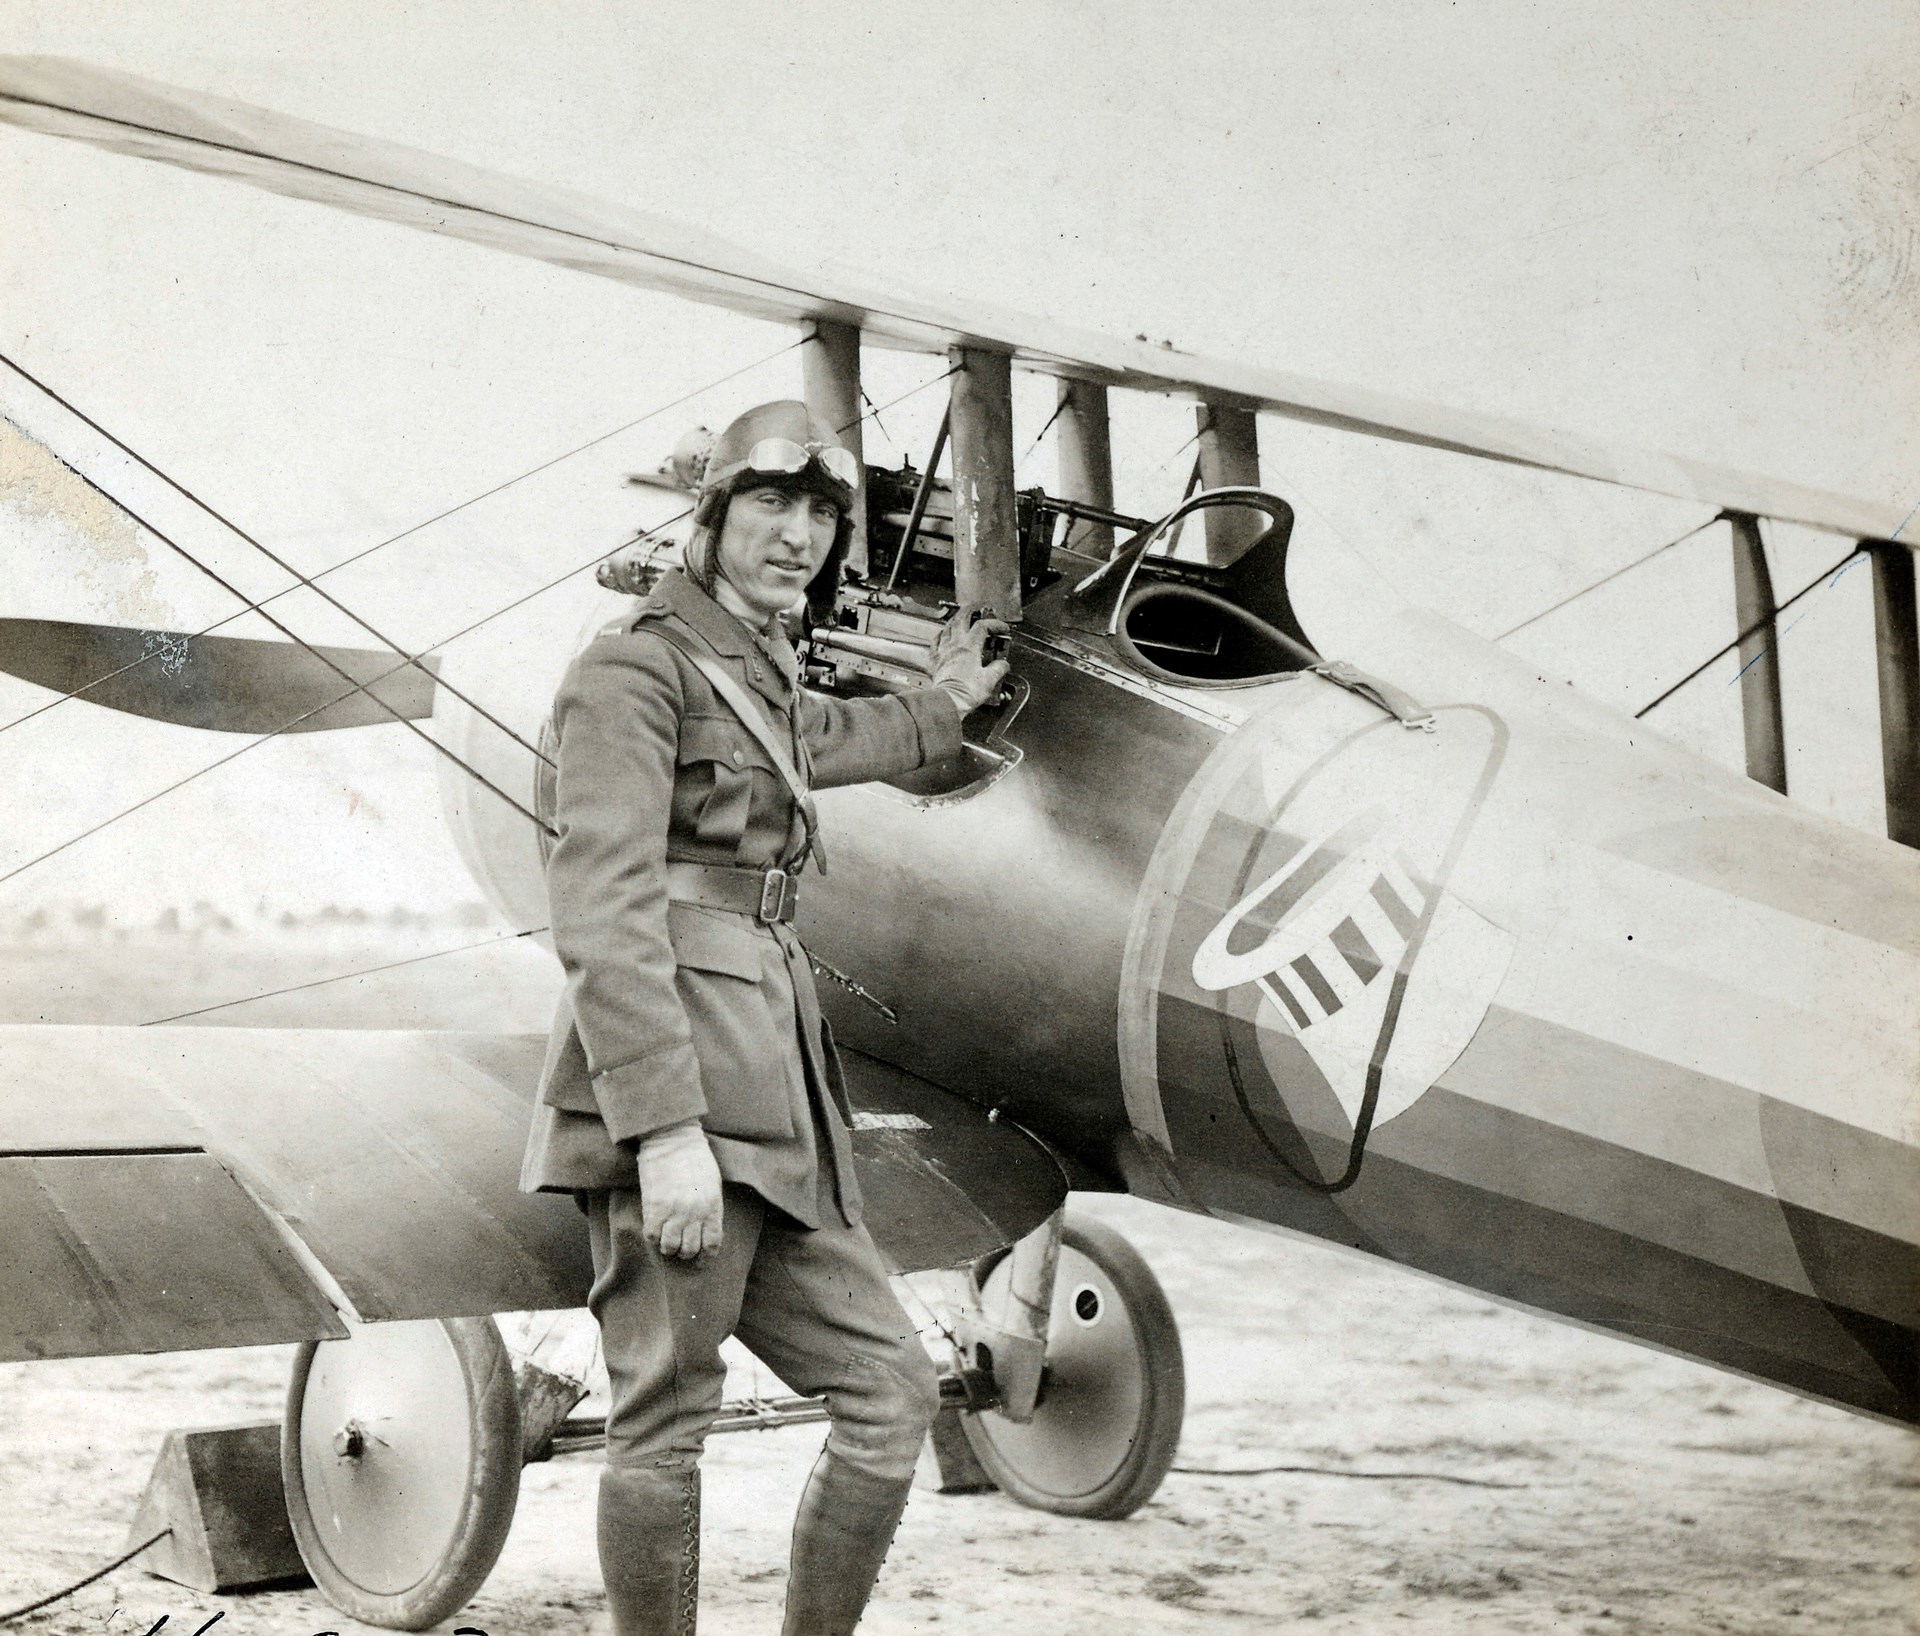 America’s “Ace of Aces” Lt. (later Capt.) Eddie Rickenbacker, of the 94th Aero Squadron. Rickenbacker stands by his first mount, a Nieuport 28—he scored the first six of his 26 victories in this type. Twin Vickers guns are mounted on the port side of the cockpit. N.A.R.A. photograph.